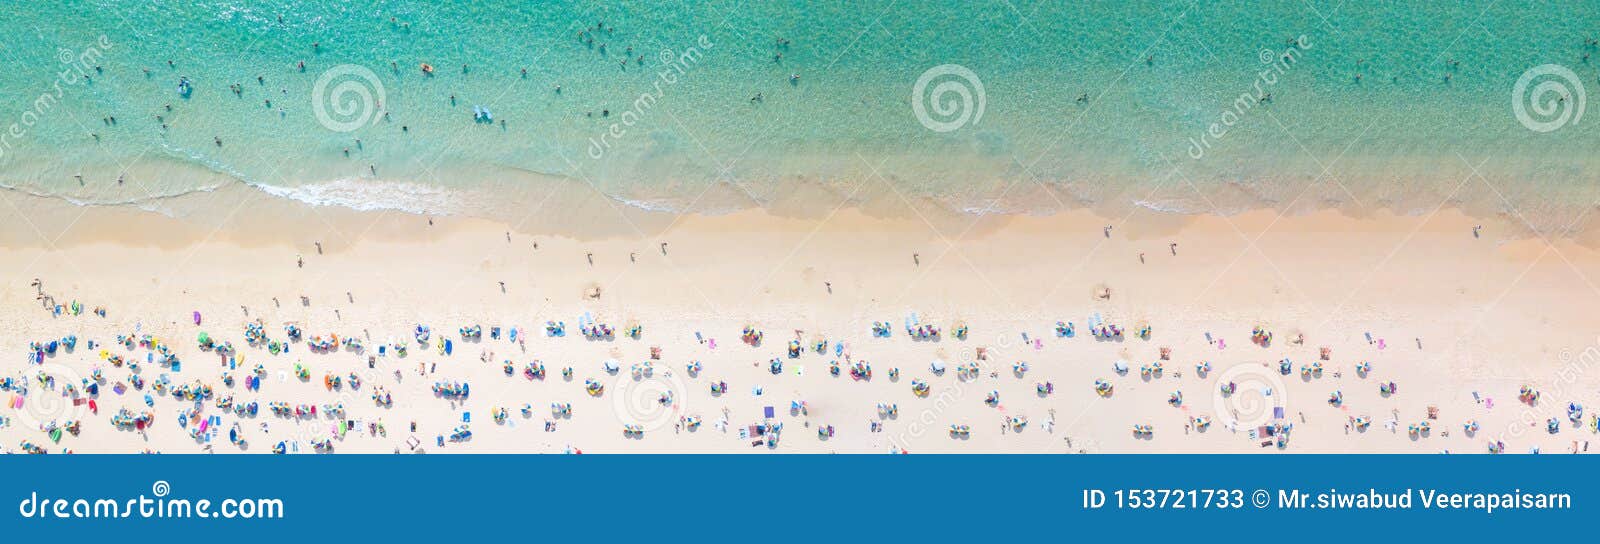 aerial view crowded public beach with colourful umbrellas, aerial view of sandy beach with tourists swimming in beautiful clear